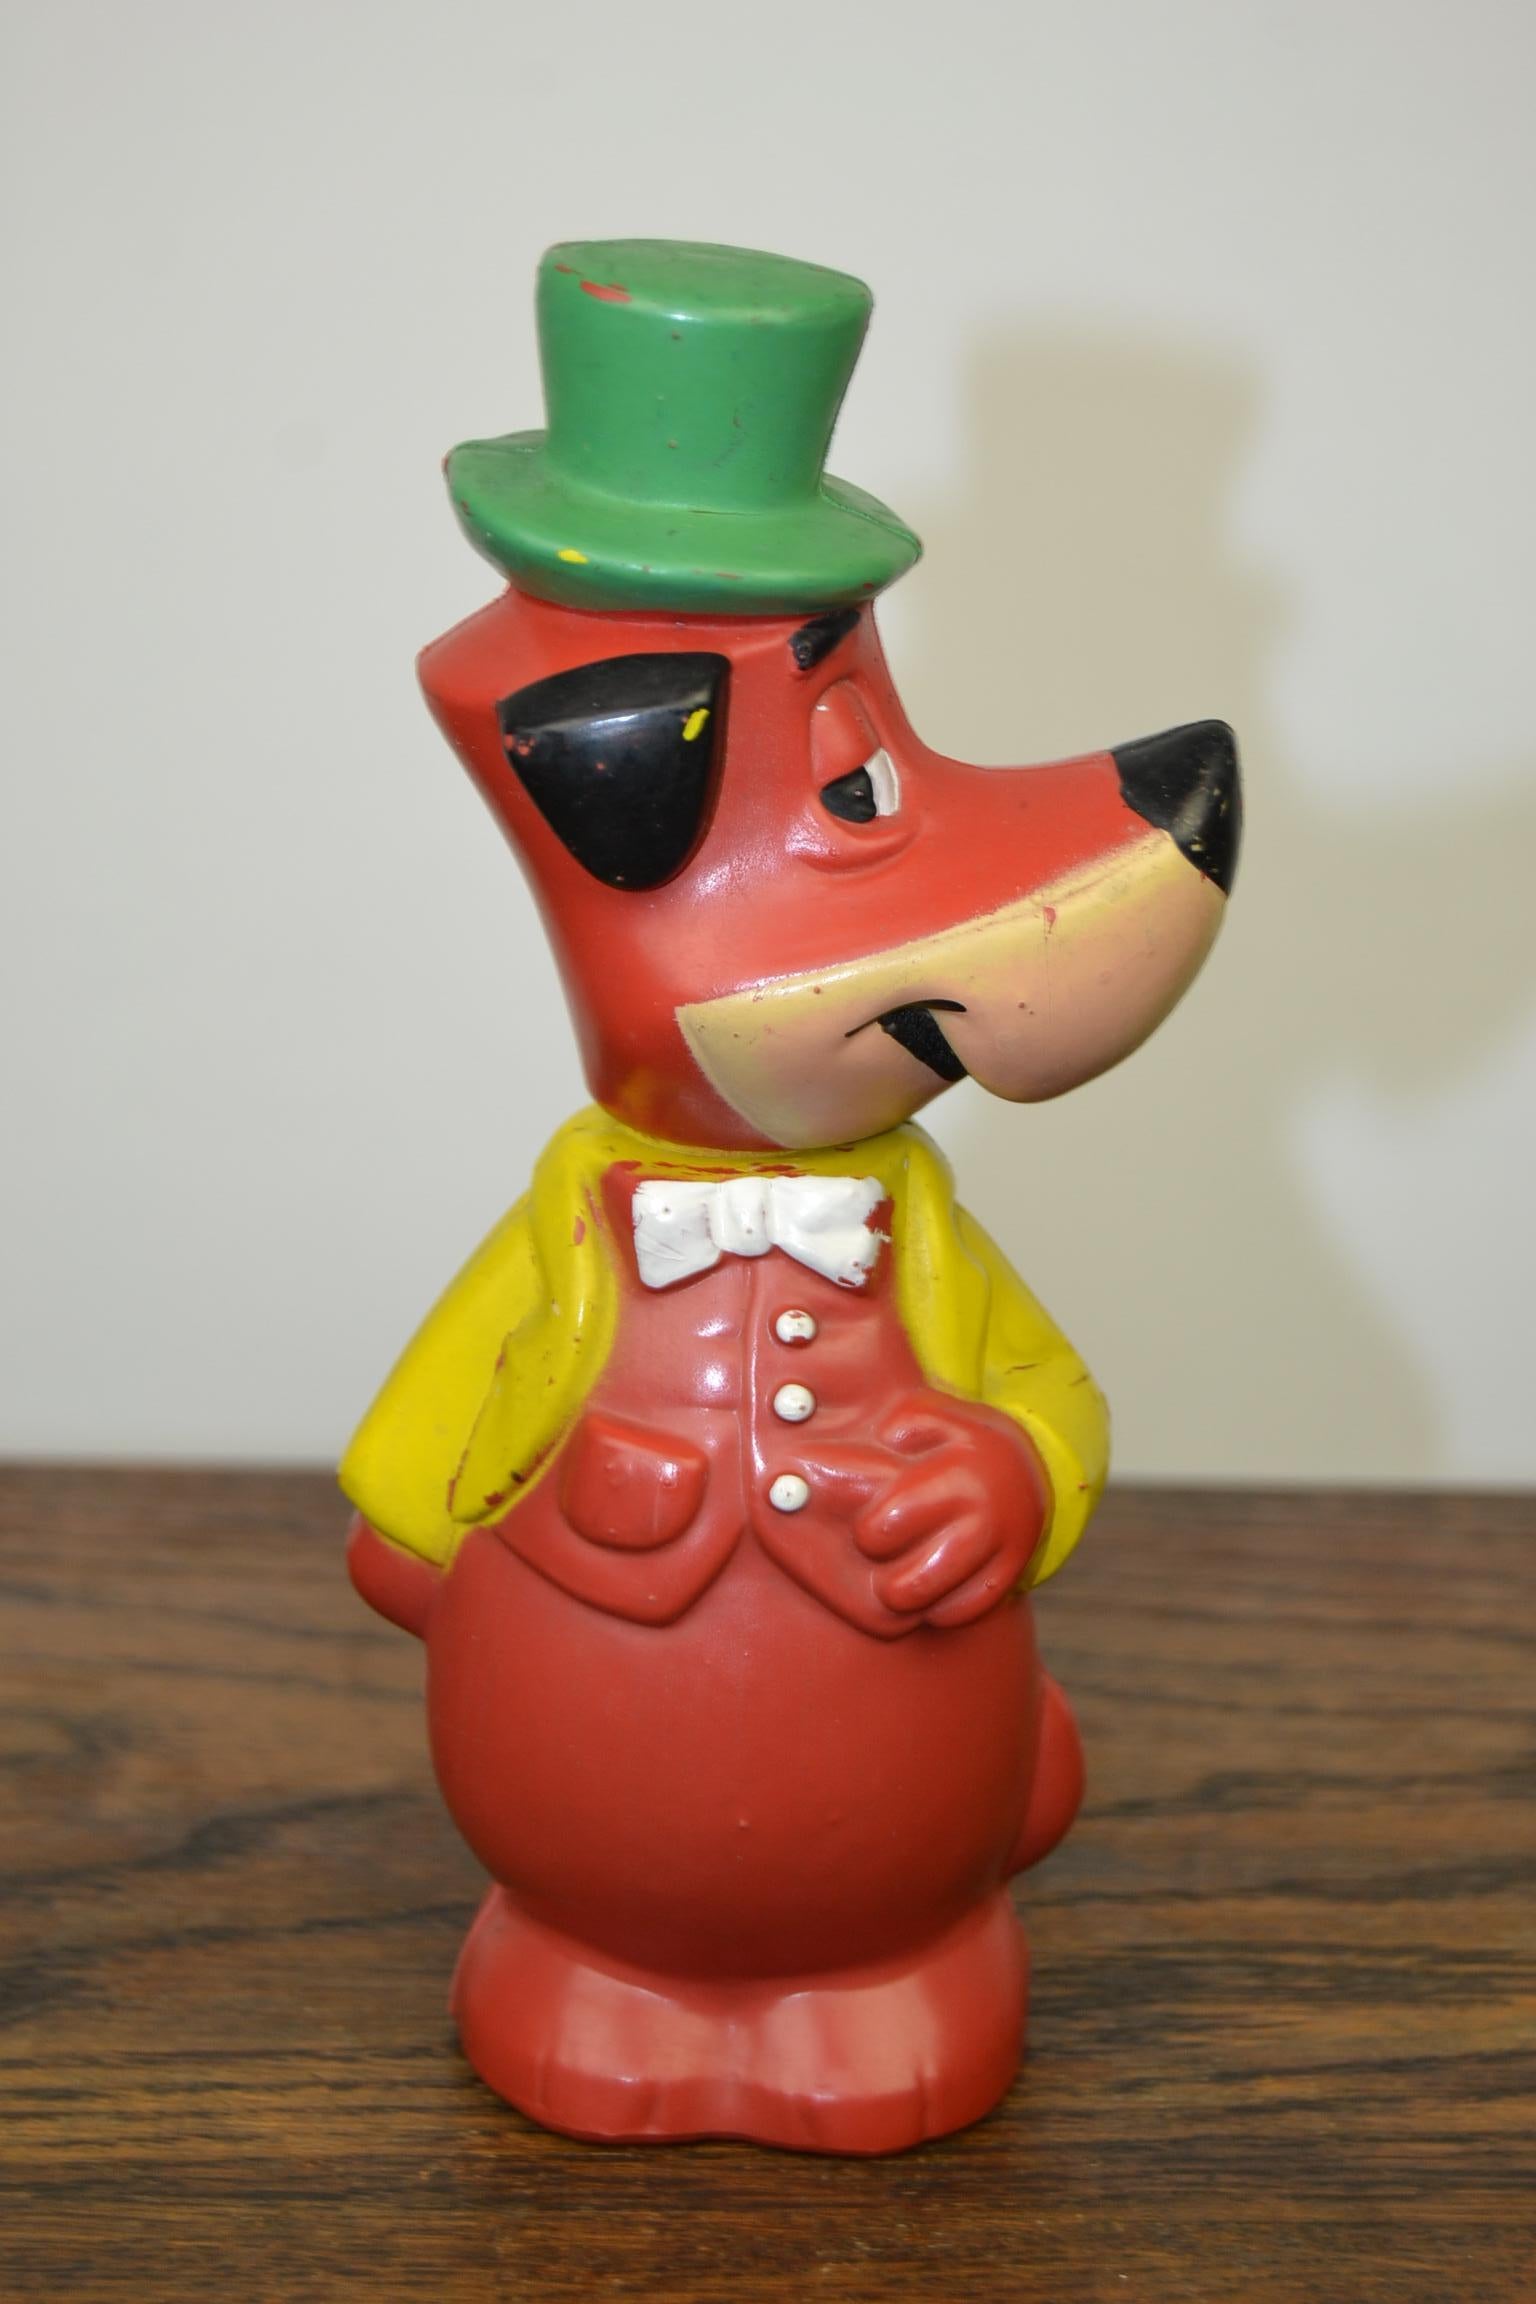 Nostalgic toy figurine, the Huckleberry Hound.
This Animation movie character was created by Hanna- Barbera Productions.
The rubber toy dog was made in 1965 by W.Goebel - Western Germany.
This 1960s vintage squeeze Toy has a movable head, a green